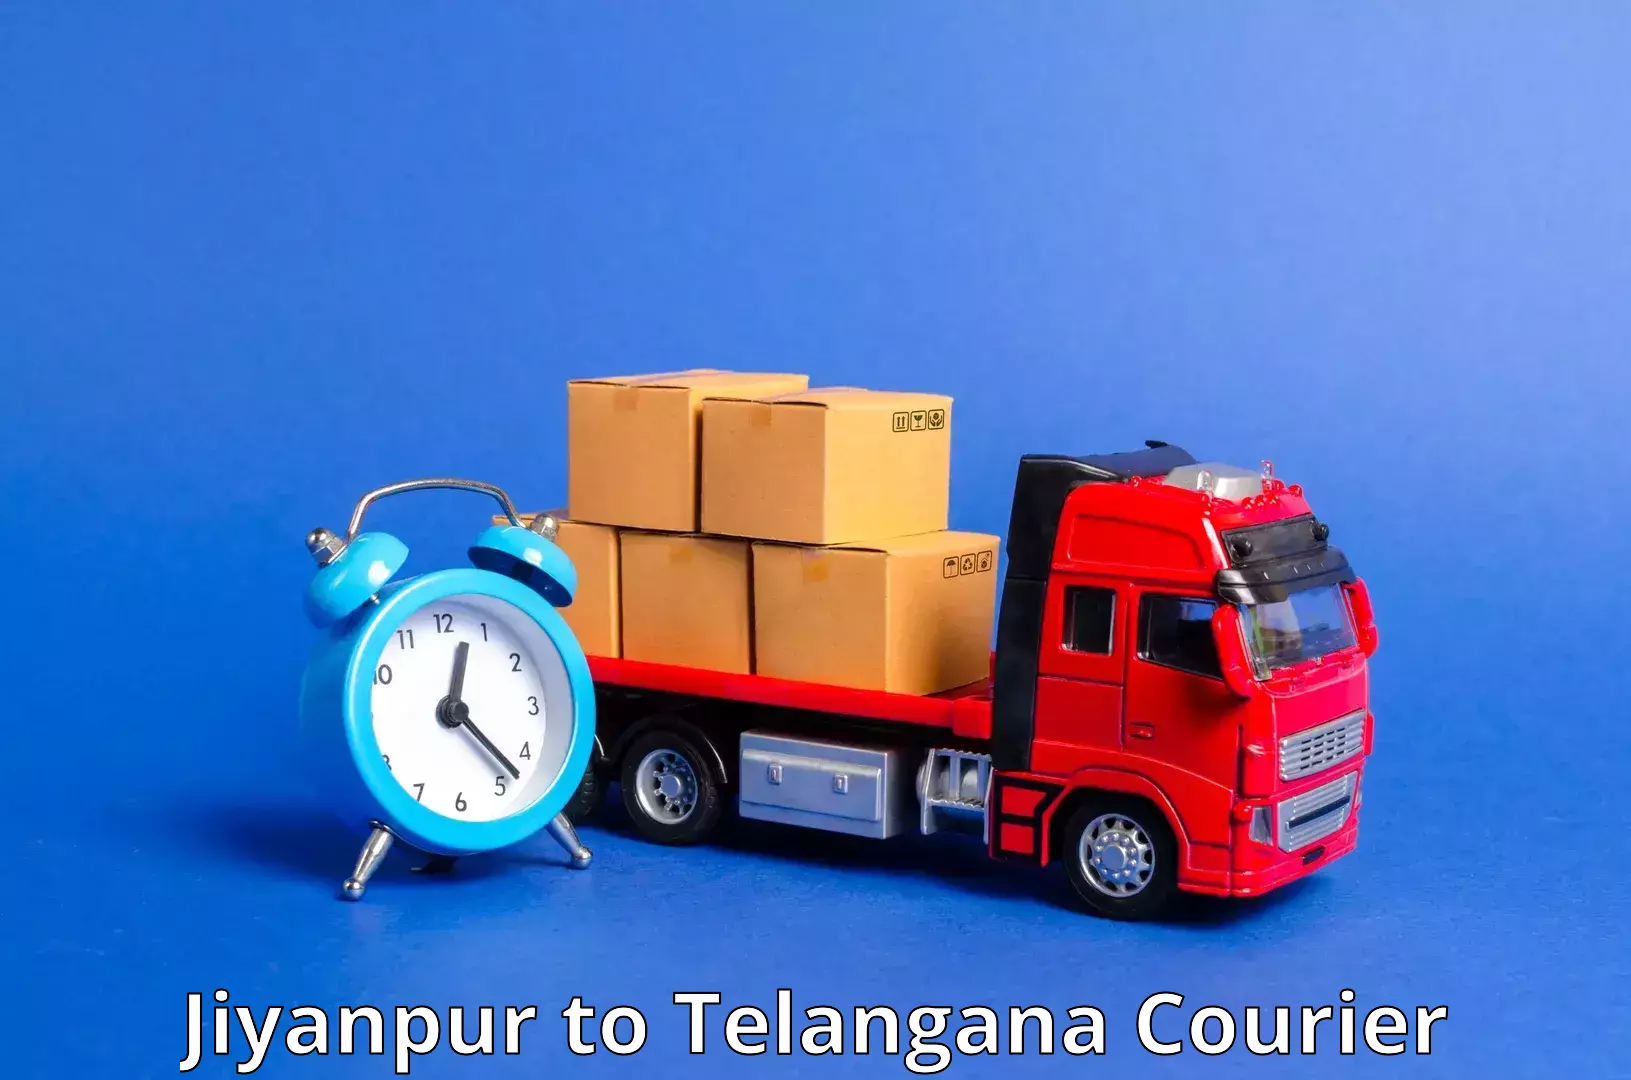 Express courier capabilities Jiyanpur to Secunderabad